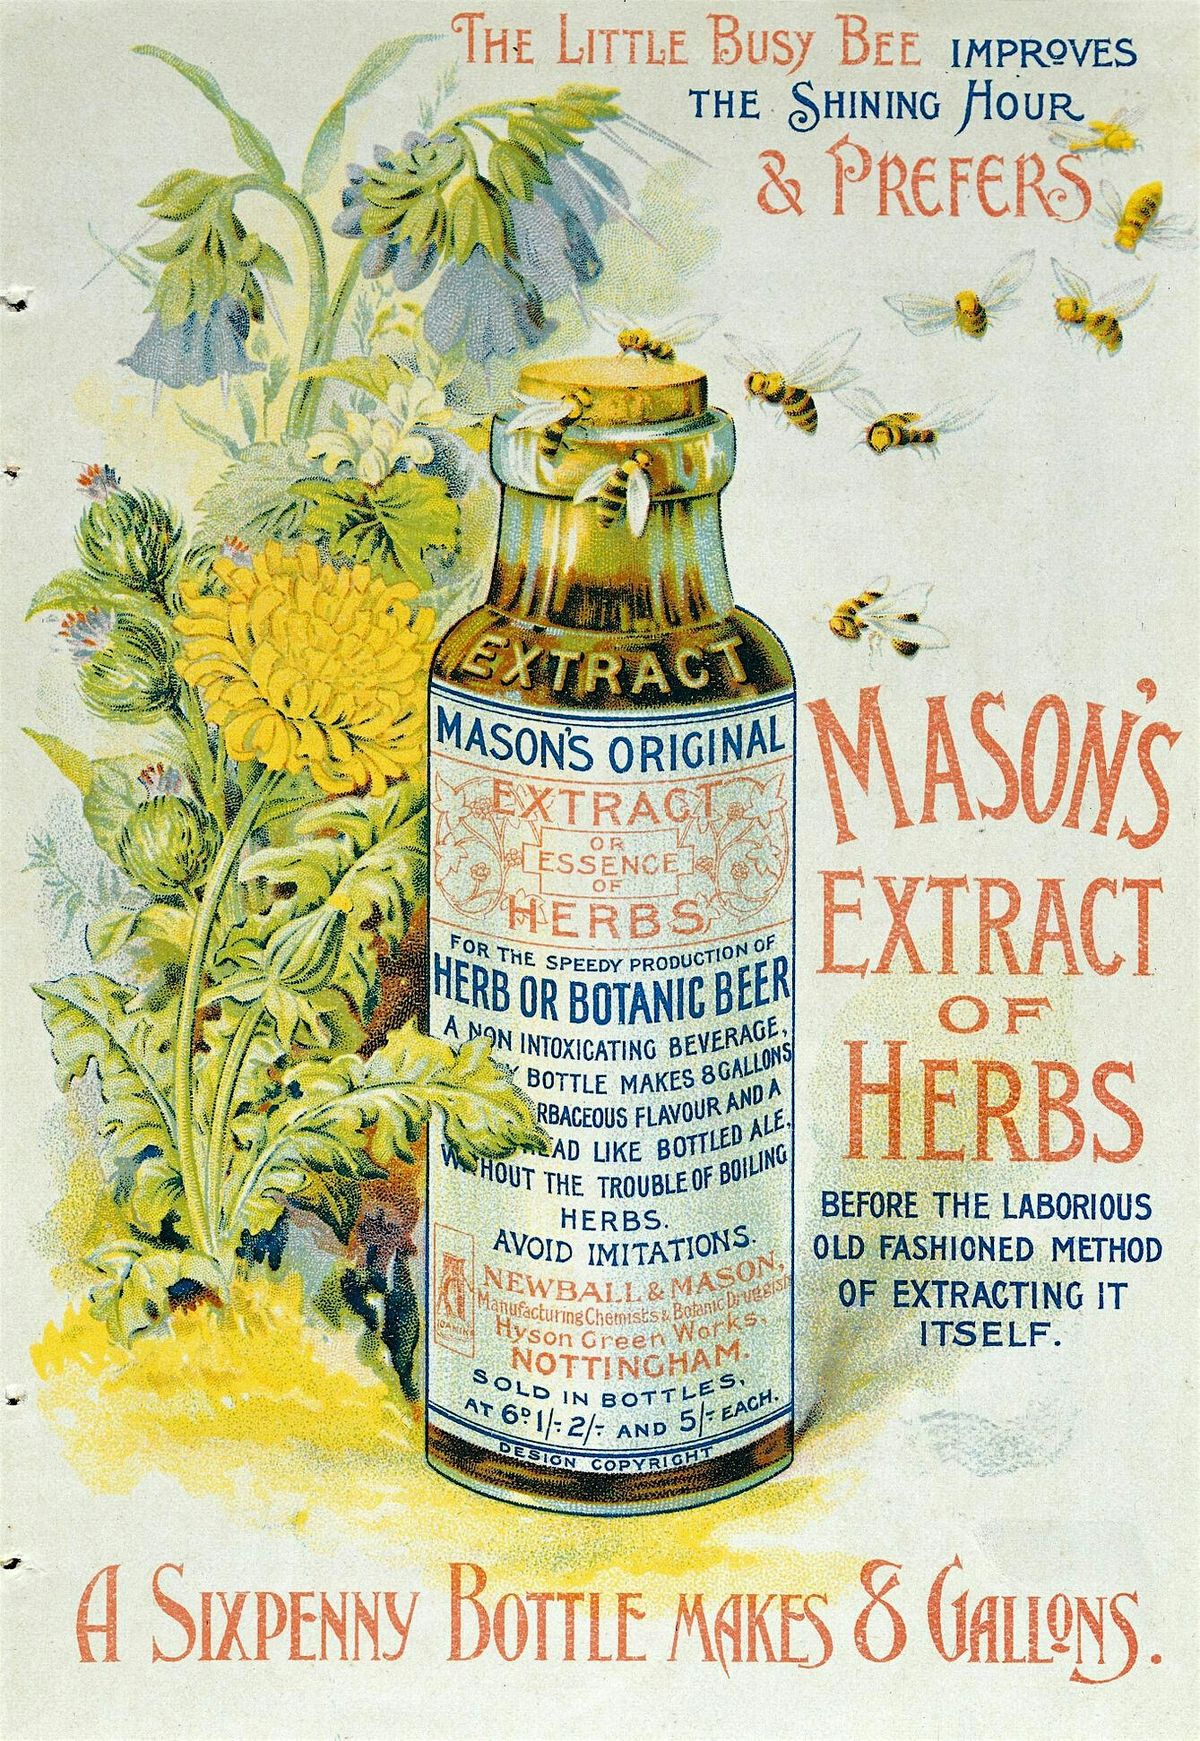 Converging Influences in the History of Western Herbal Medicine & Practice